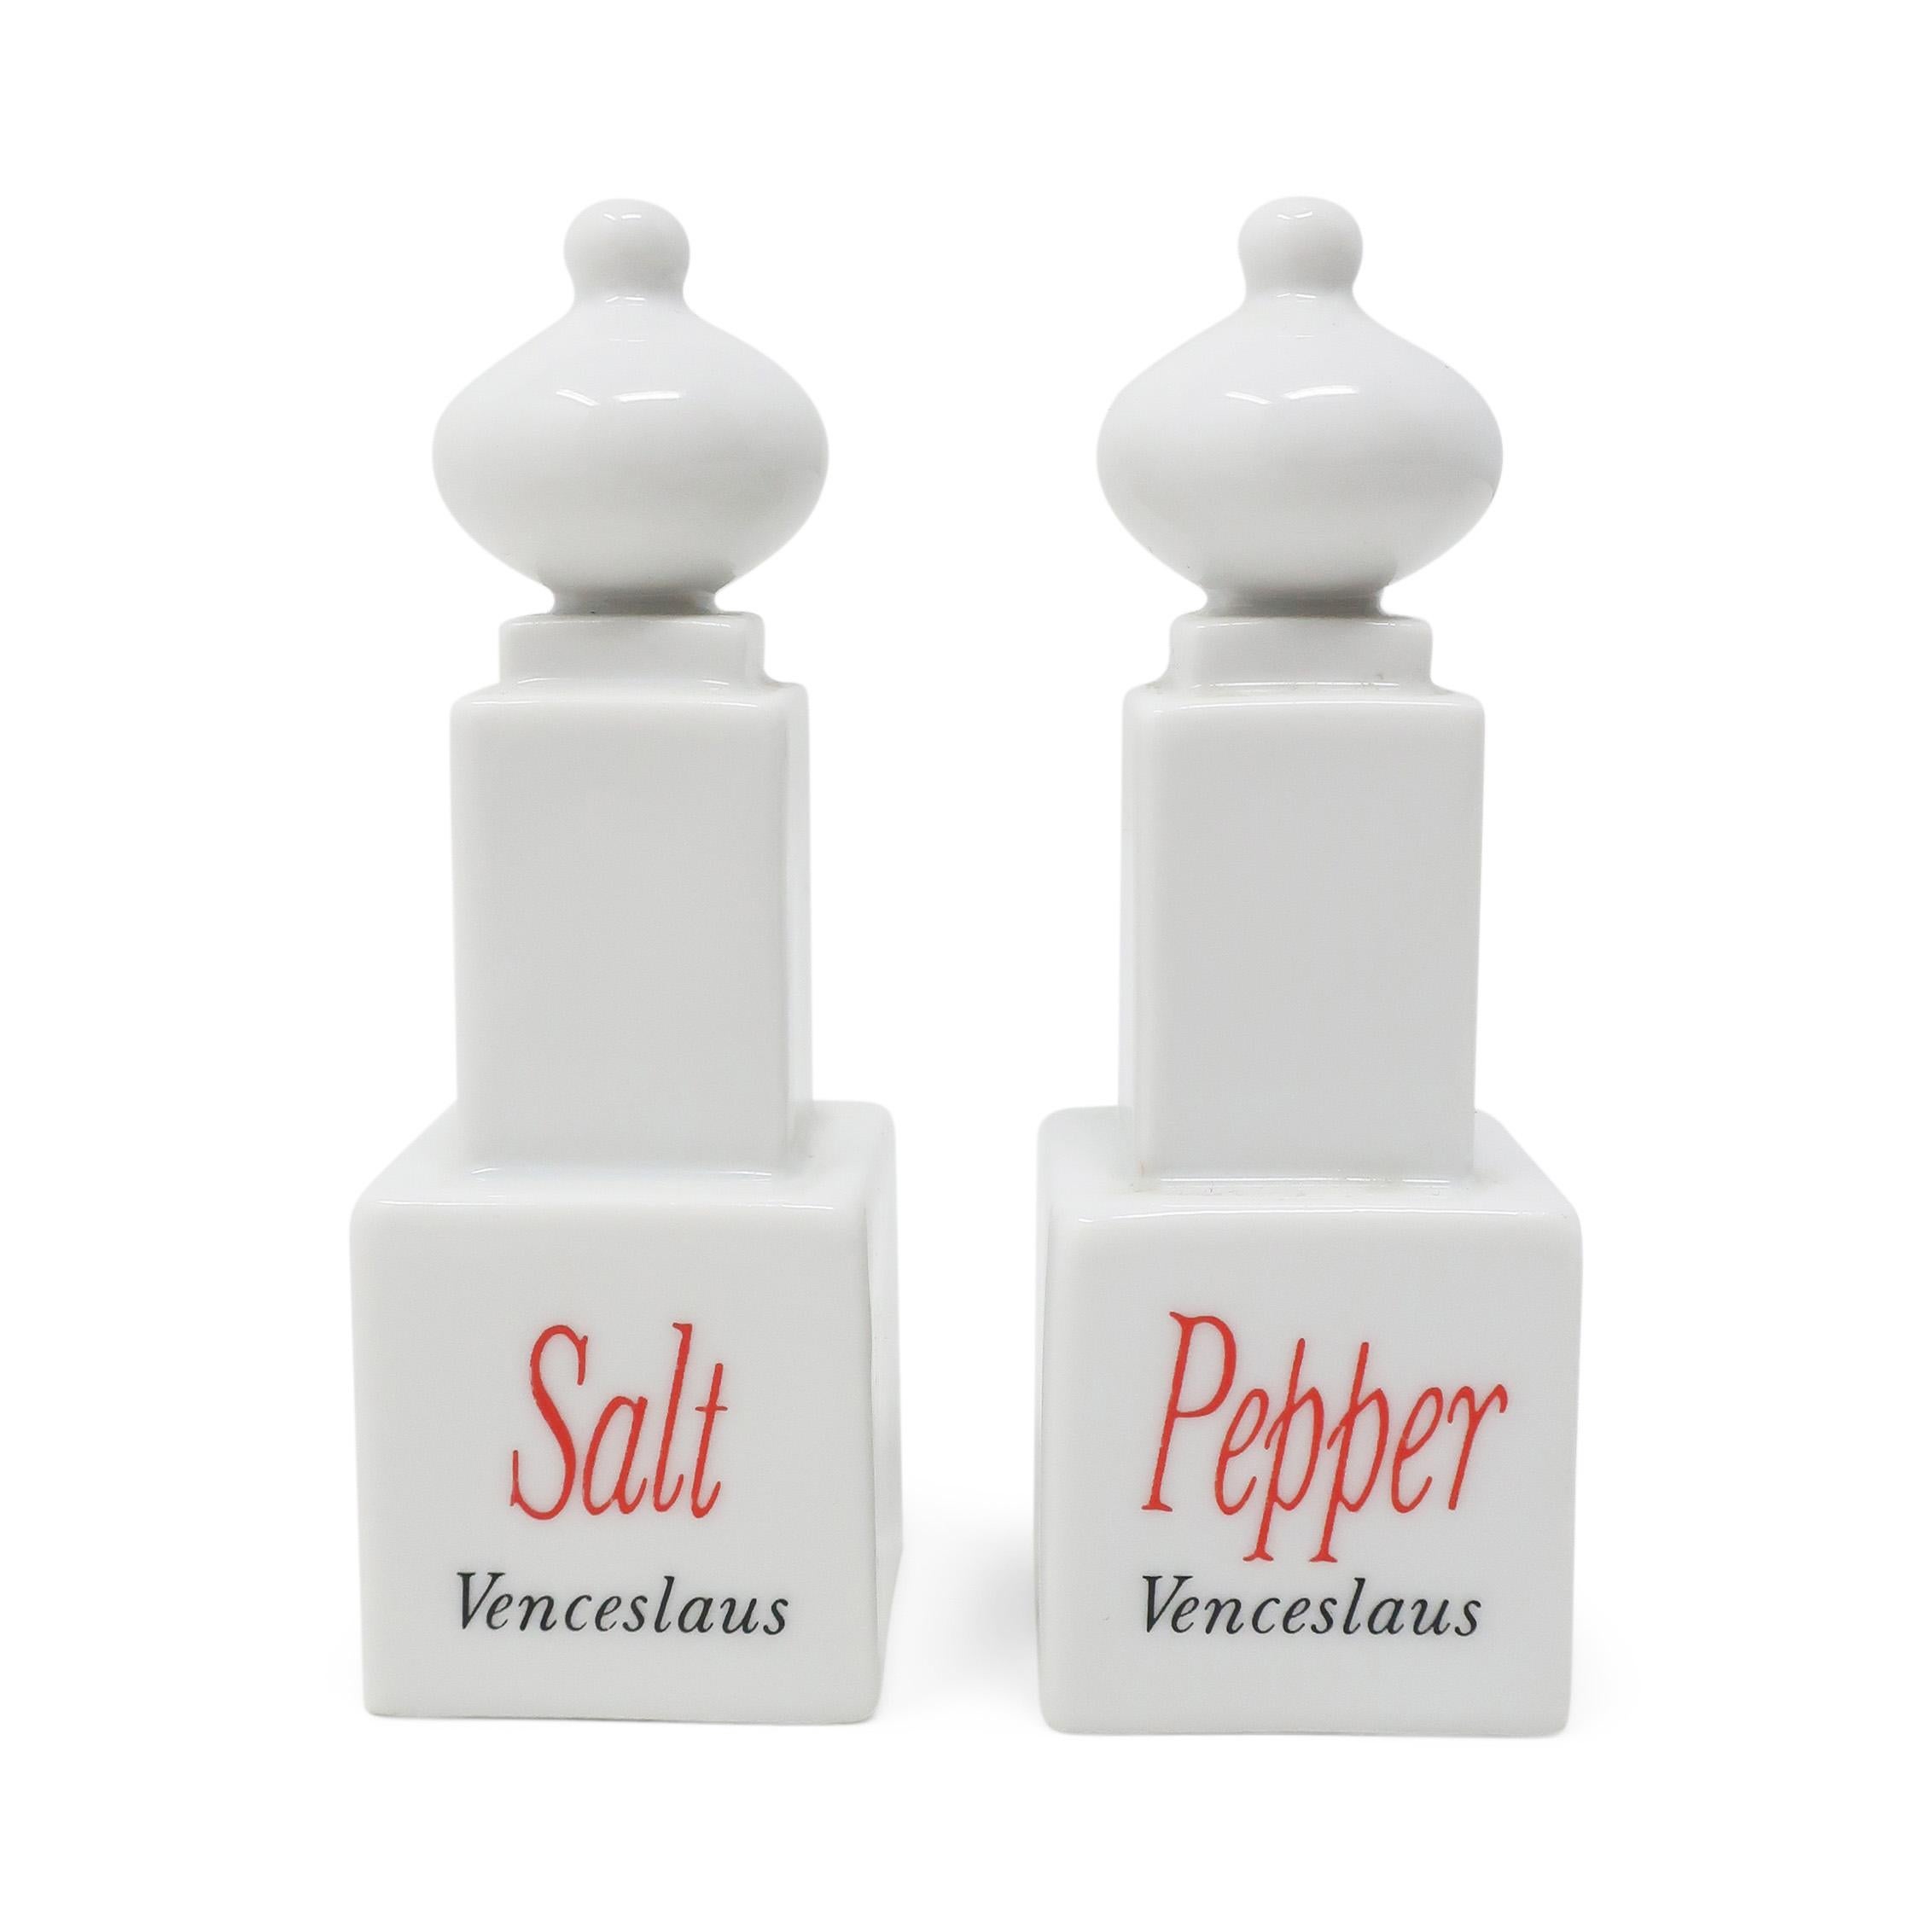 This pair is part of a series of 6 'Monumenti' pepper & salt shakers, inspired by ancient buildings and monuments designed by Matteo Thun for Arzberg in 1987. Thun is a well-know Italian architect, designer, and co-founder of the Memphis Group and